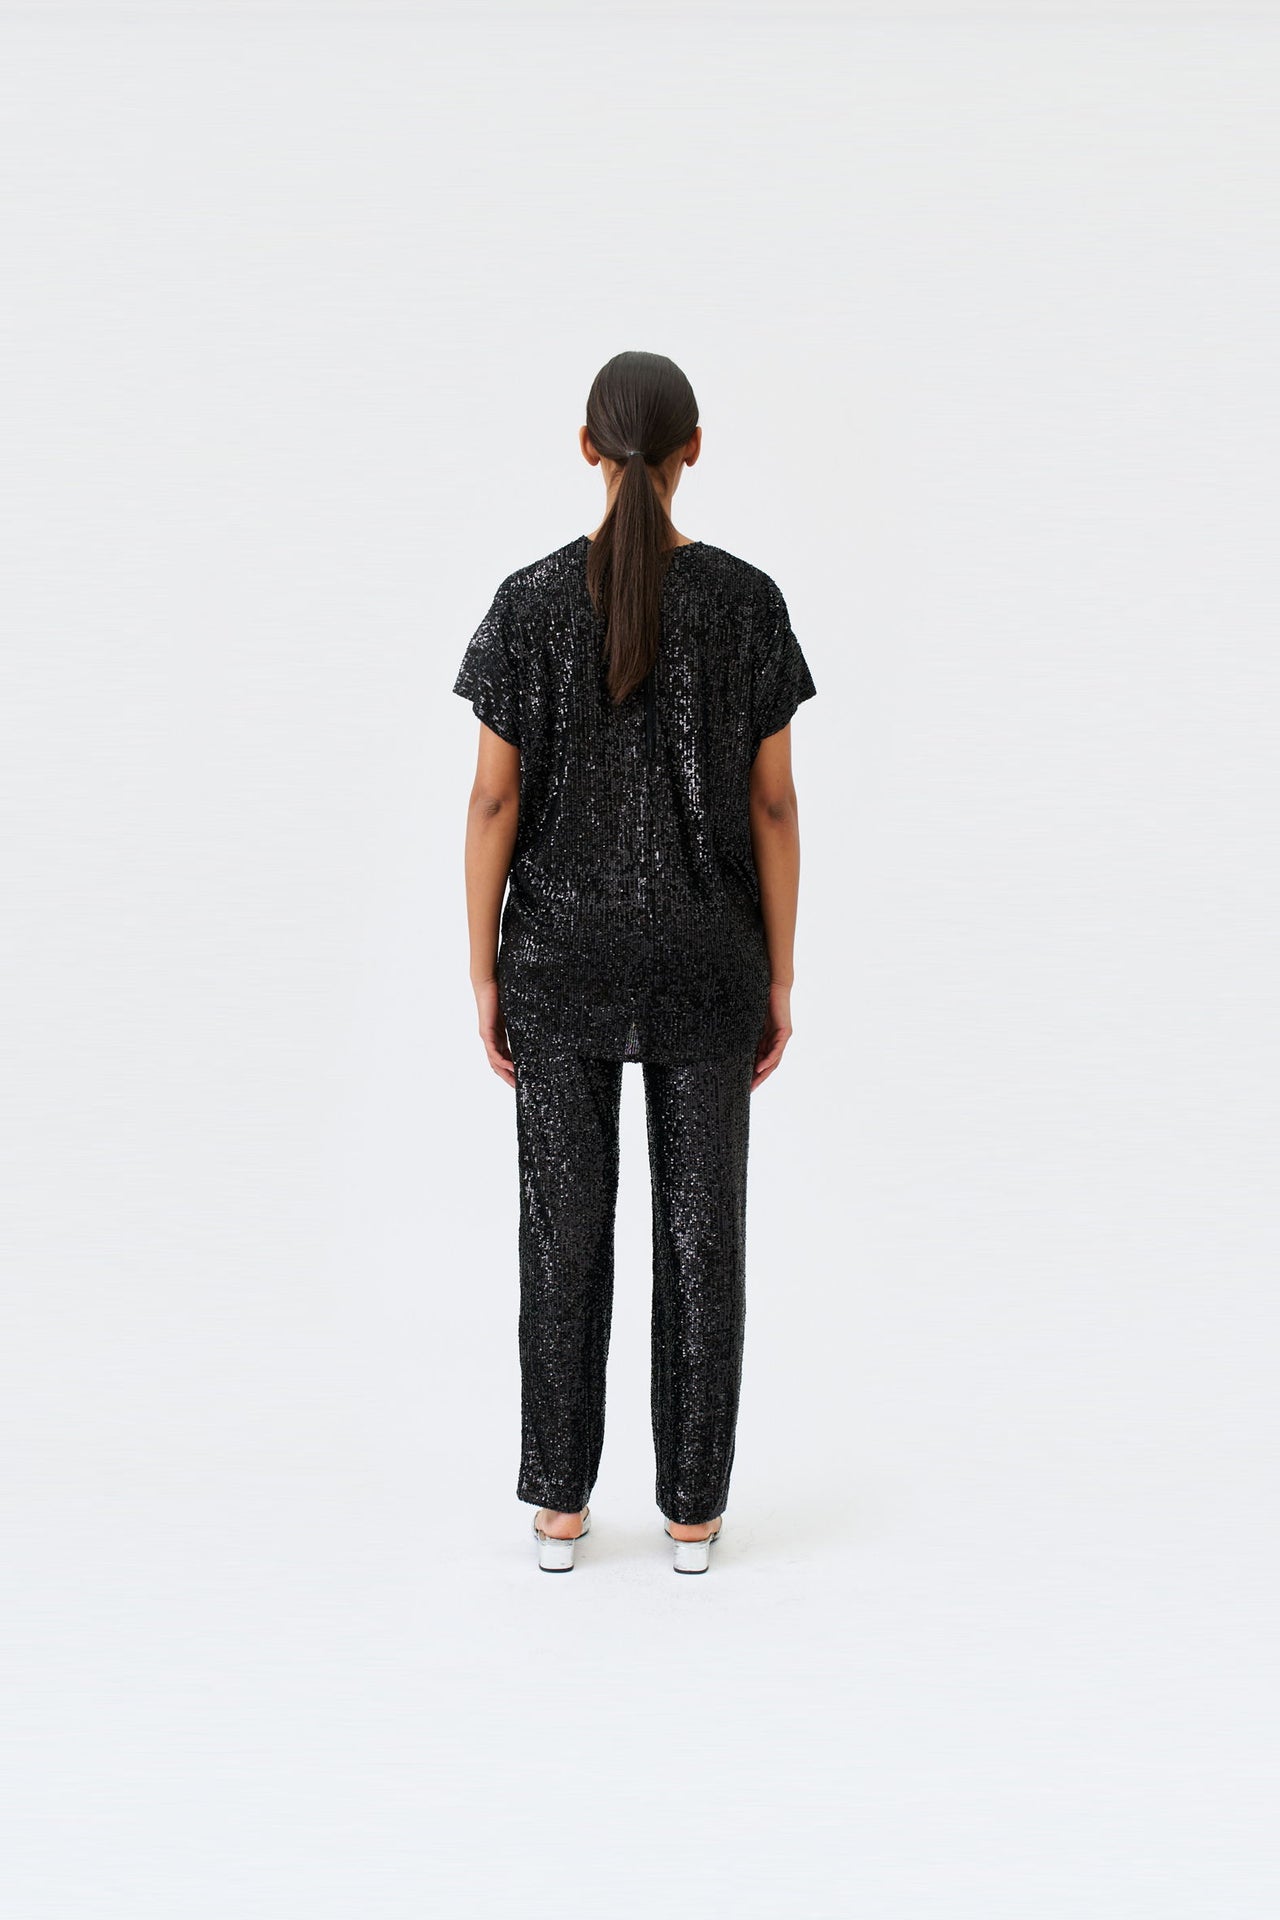 wingate collection tia black top on female model with silver slippers back